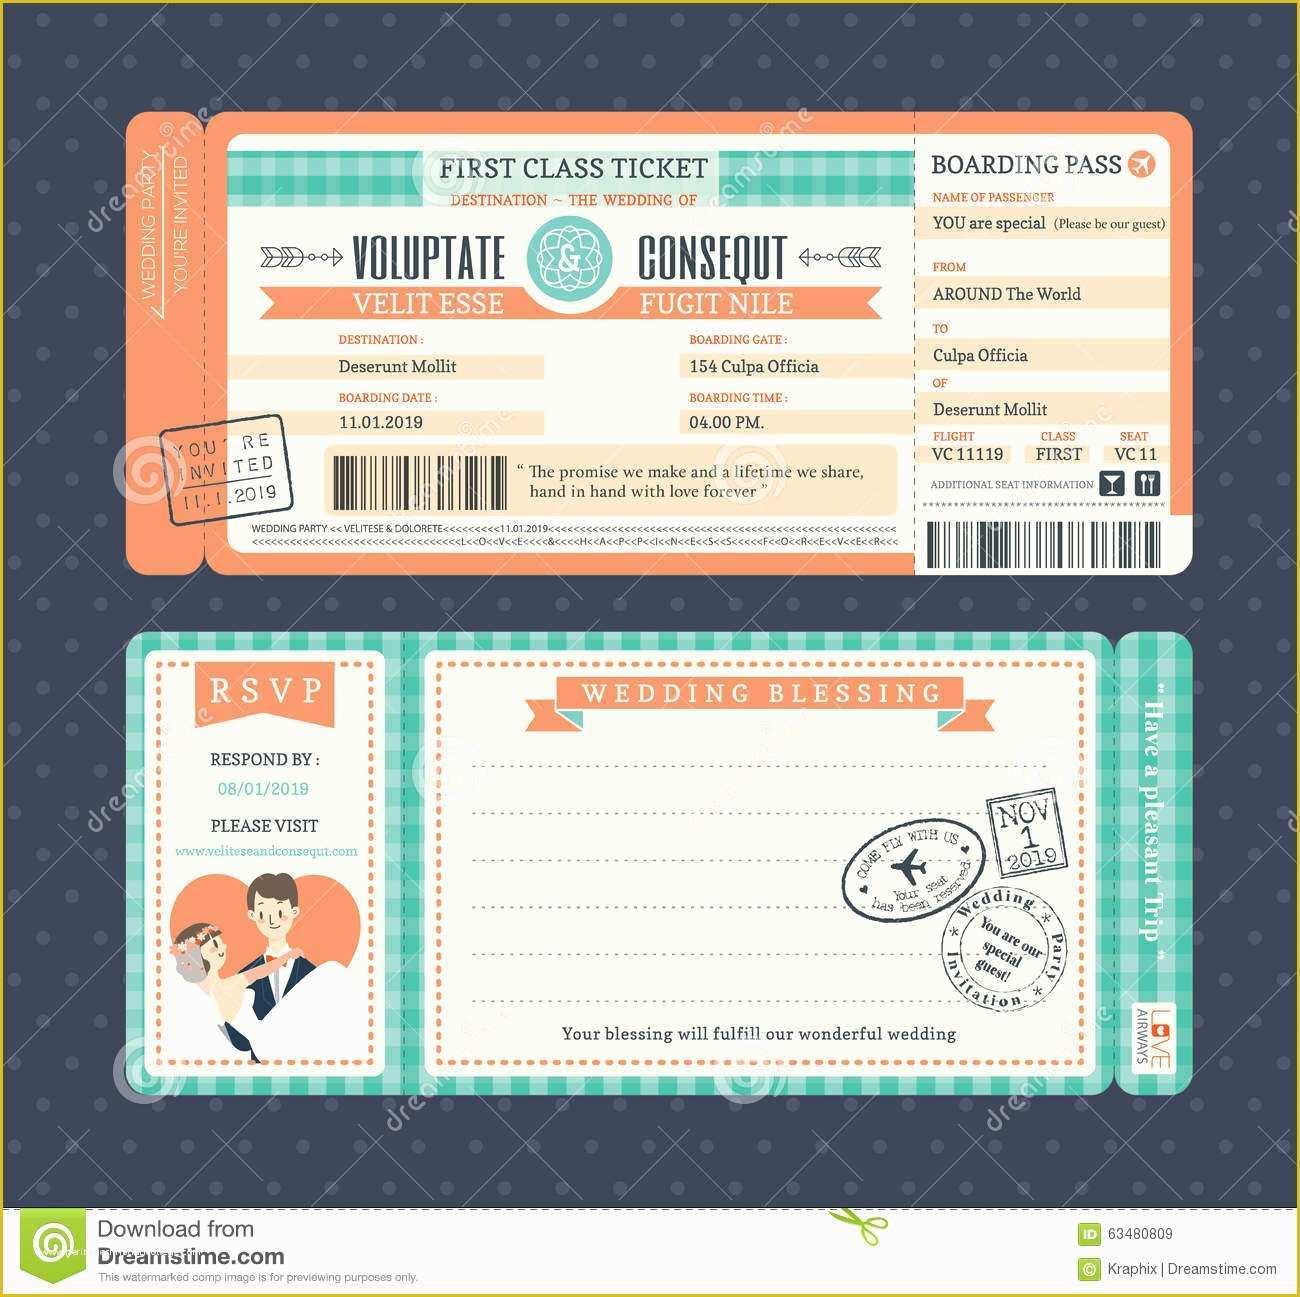 Boarding Pass Invitation Template Free Of Pastel Retro Boarding Pass Wedding Invitation Template